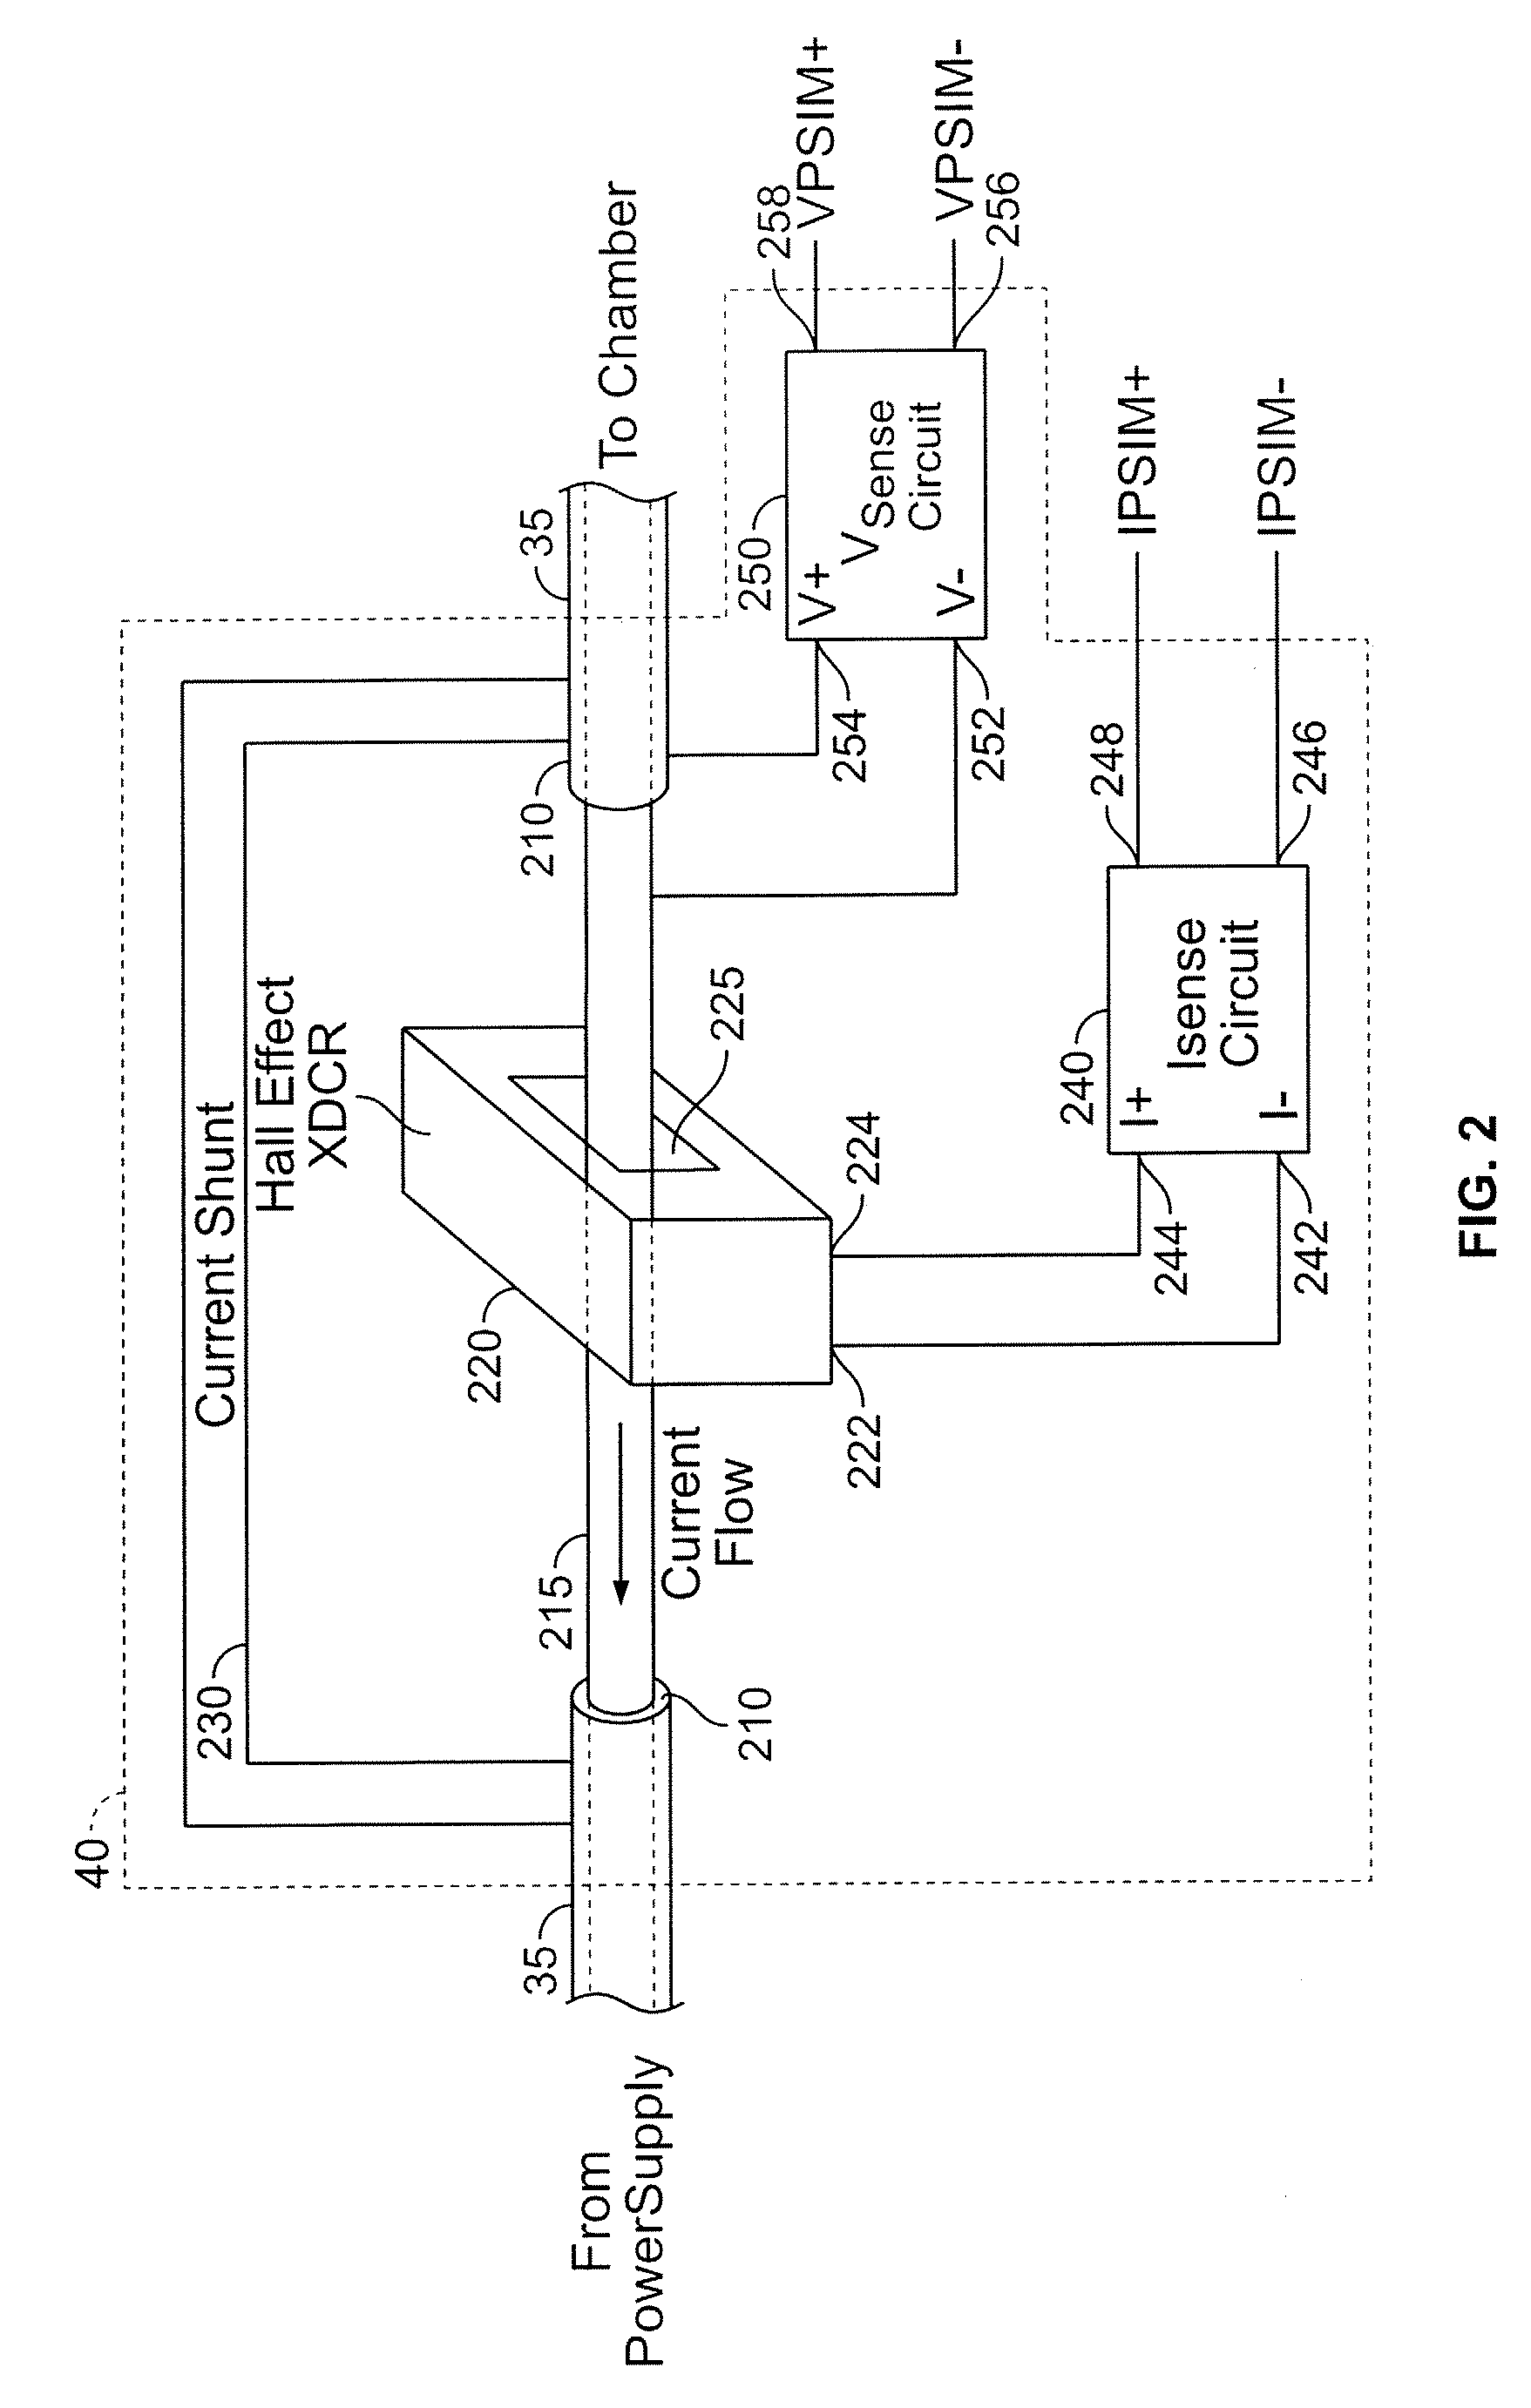 System and Method for Detecting Non-Cathode Arcing in a Plasma Generation Apparatus